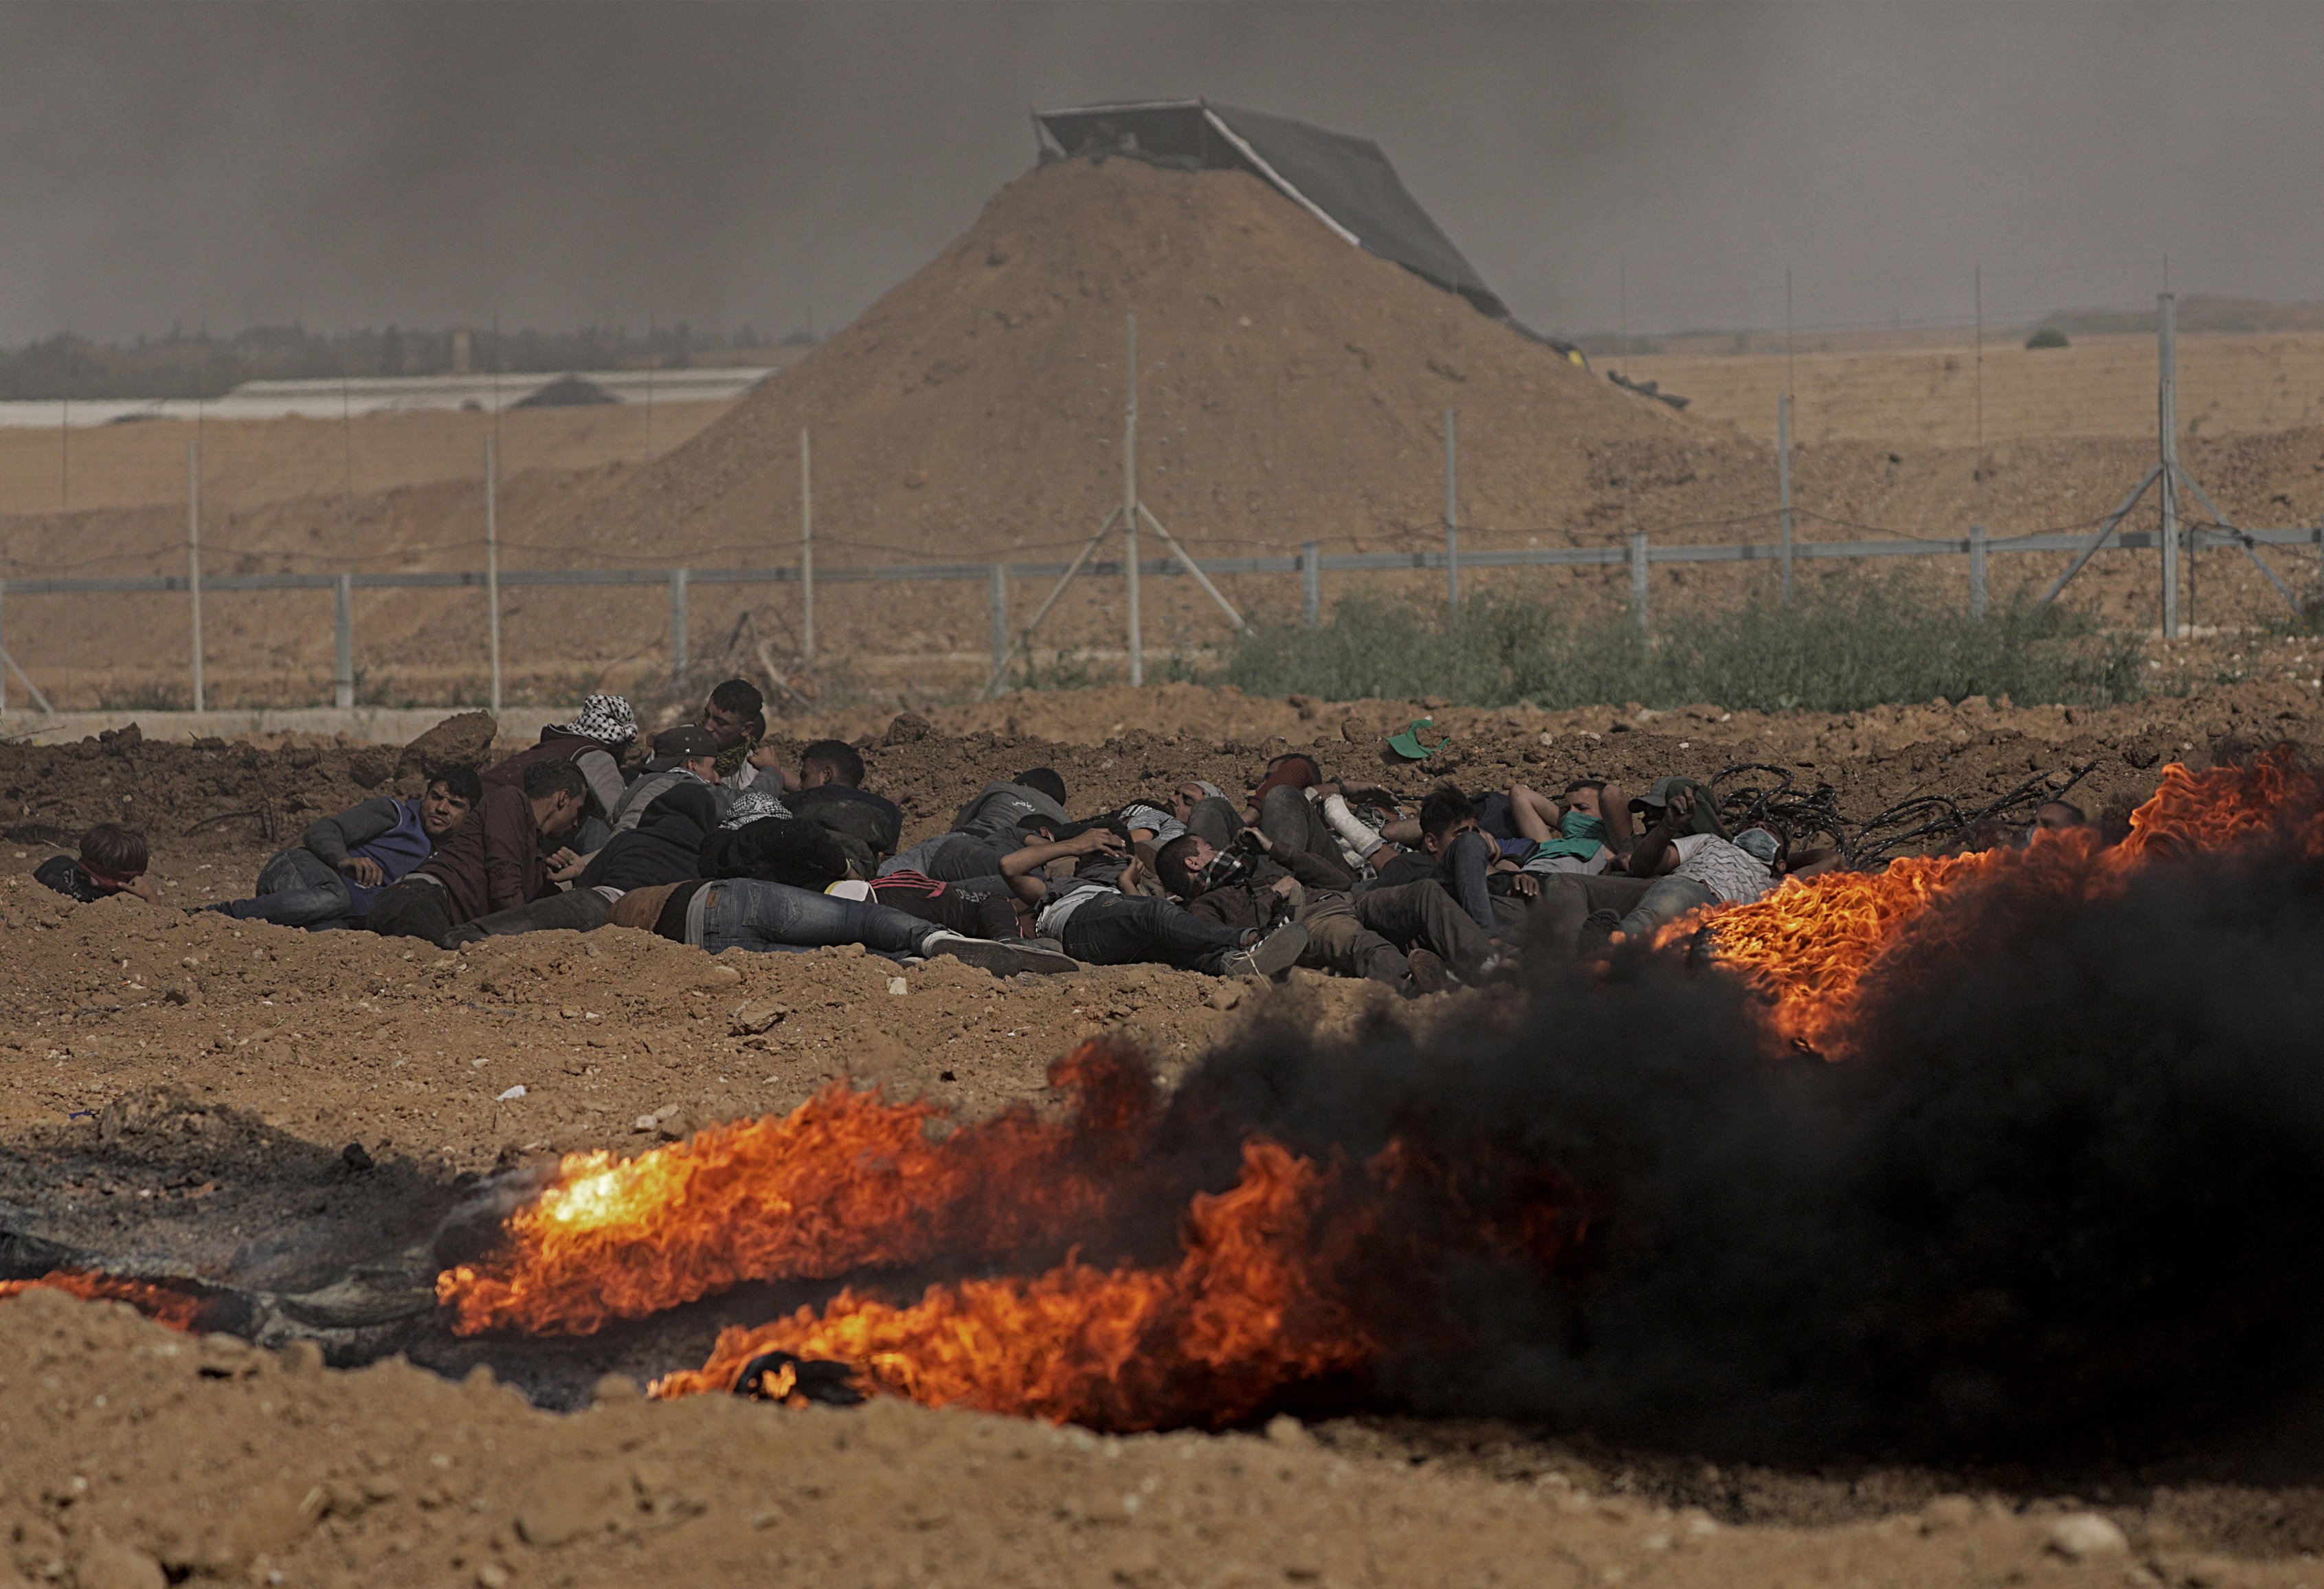 epa06668629 Palestinians protesters take cover during clashes with Israeli troops near the border with Israel in the east of Gaza City on, 13 April 2018 (issued 14 April 2018). According to local sources, more than 700 Palestinians were injured during fresh clashes in the east Gaza Strip near the border with Israel. Thousands of Palestinians in the Gaza strip protested on 13 April as part of the so-called Great March of Return demonstration for the third consecutive week along Gaza's border with Israel, calling for the right of Palestinian refugees and their descendants to return to their homelands. Since the beginning of the Great March of Return on 30 March, riots have been taking place near the Gaza-Israeli border, to which the Israeli army has responded with crowd control and live ammunition.  EPA/MOHAMMED SABER